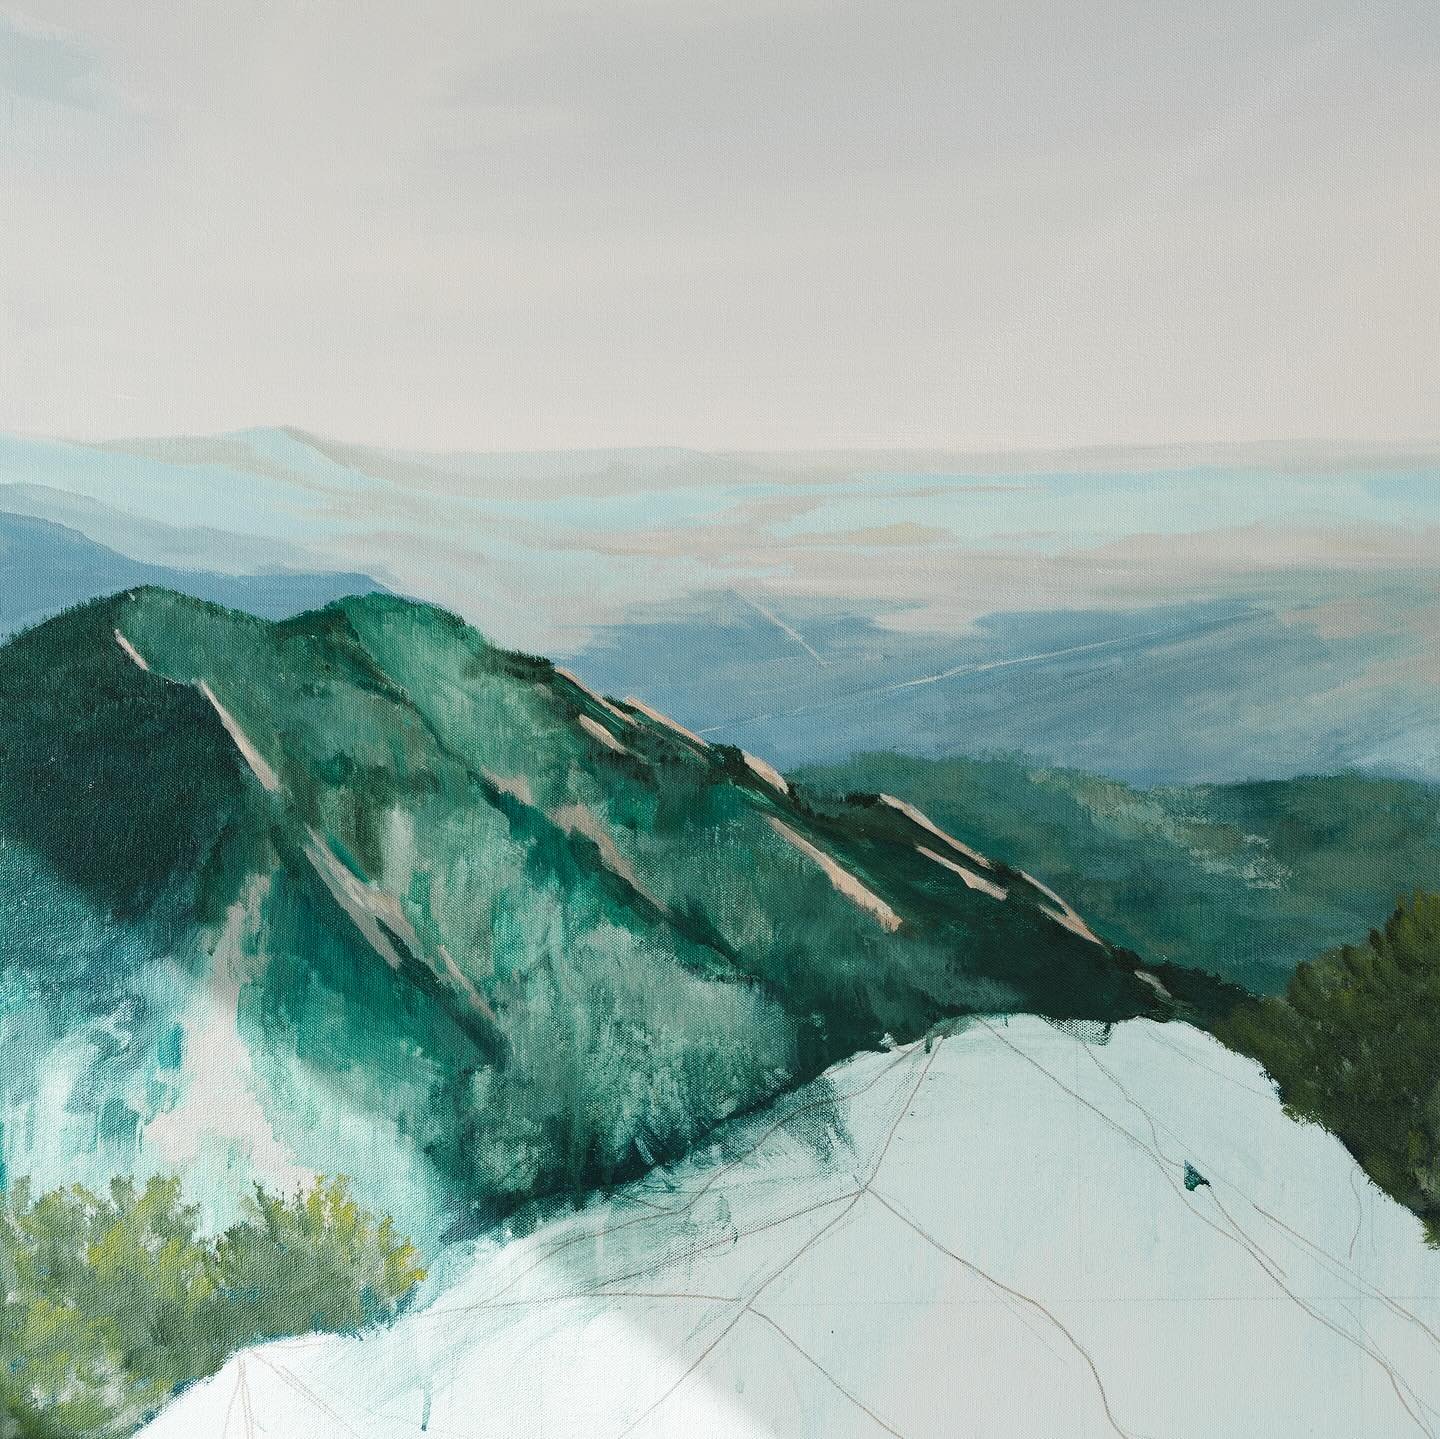 WIP from the top of Bear Peak! 

30 x 40 inches
Acrylic and oil paint on canvas
For my upcoming solo show @thecrowdboulder 
Save the date: June 6th opening reception✨
.
.
.
.
.
.
 #coloradoart #bearpeak #boulderskylinetraverse  #BoulderArt #Boulderco